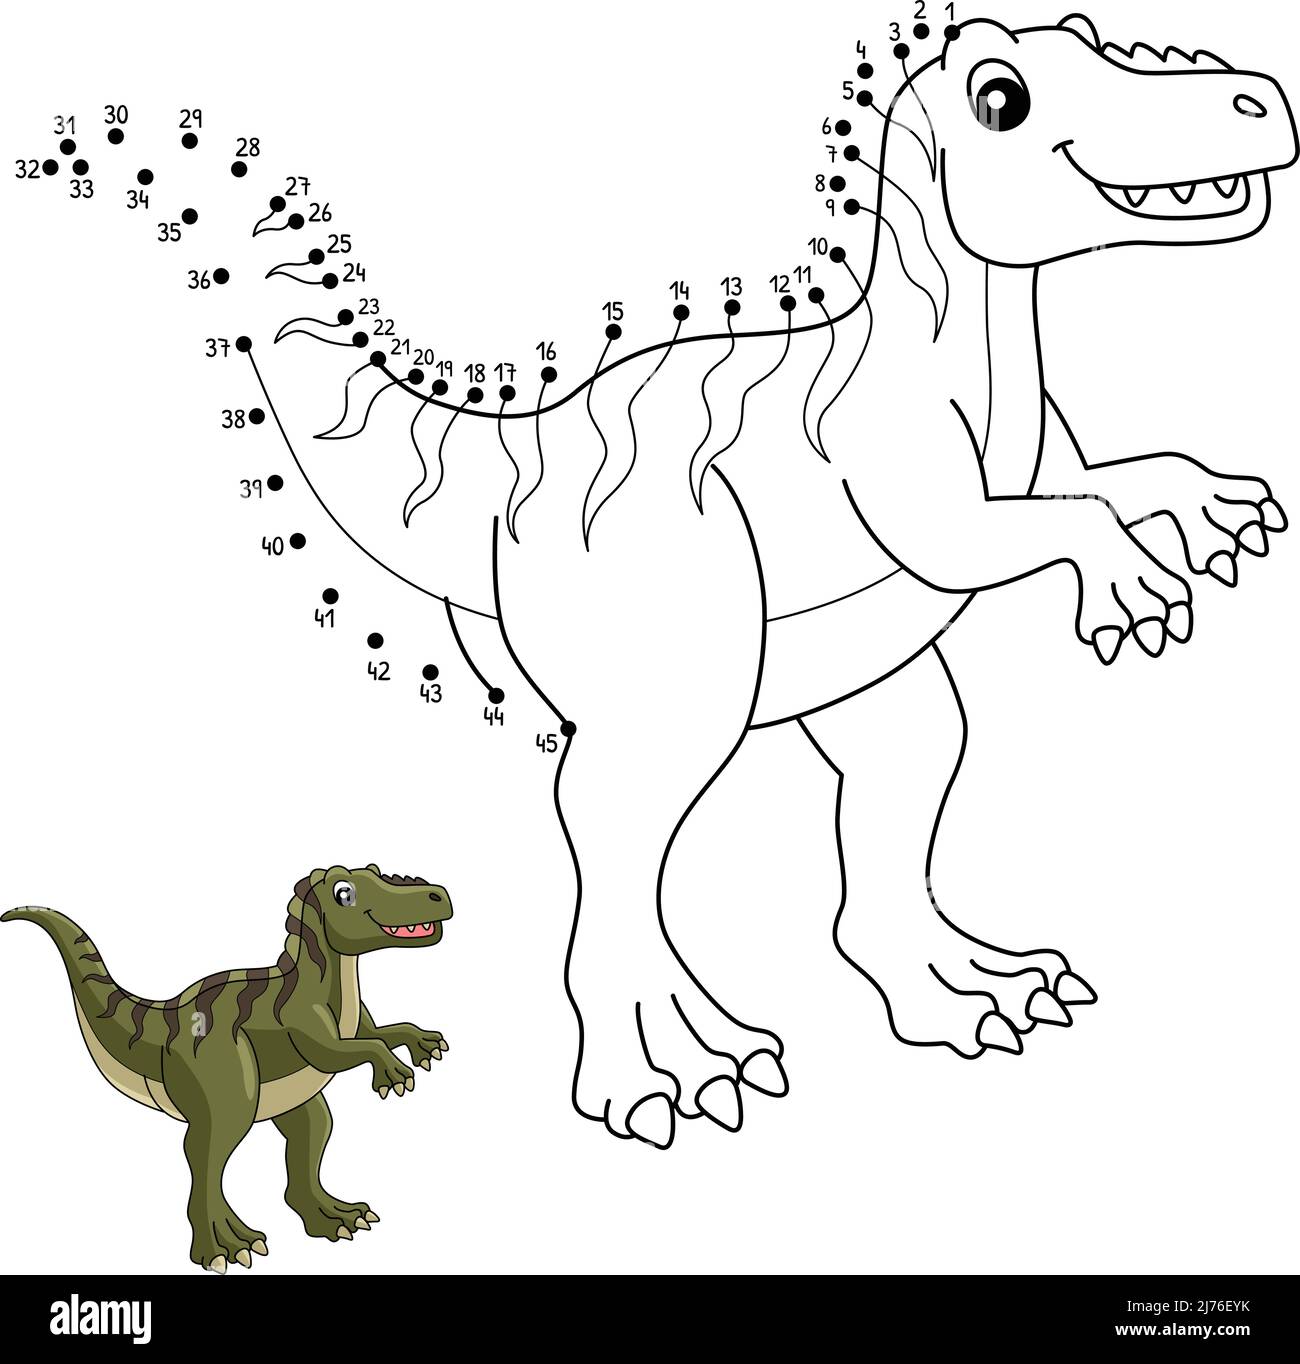 Dot to dot fukuiraptor dinosaur coloring isolated stock vector image art